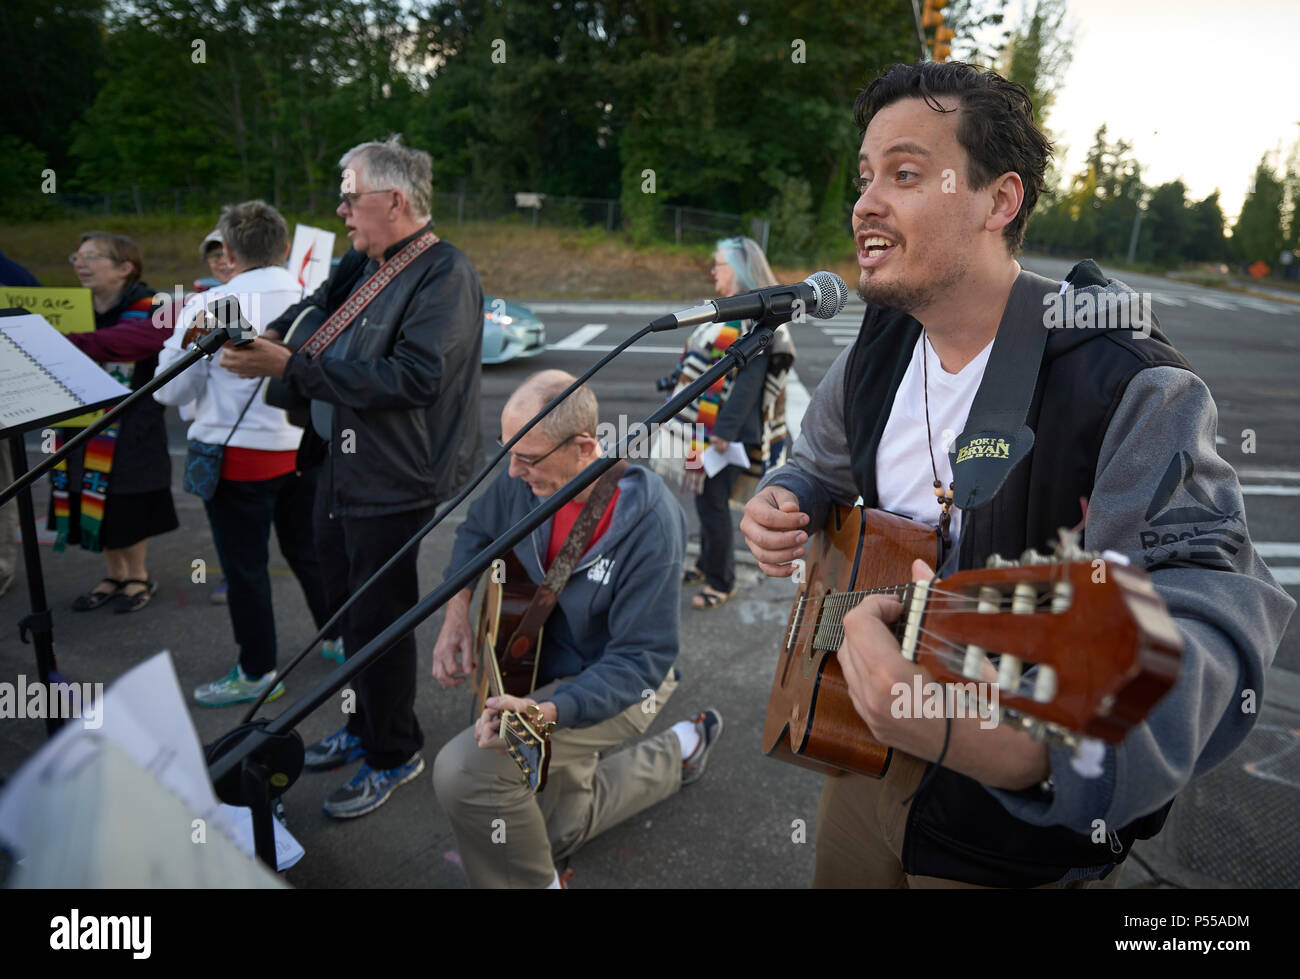 Seatac, Washington, USA. 24 June, 2018.  Joel Rodriguez leads singing outside the Federal Detention Center in Seatac, Washington, early June 24 during a prayer vigil in support of immigrant parents inside the prison who've been separated from their children. Behind him is David Reinholz. The vigil was sponsored by the United Methodist Church.  Credit: Paul Jeffrey/Alamy Live News Stock Photo